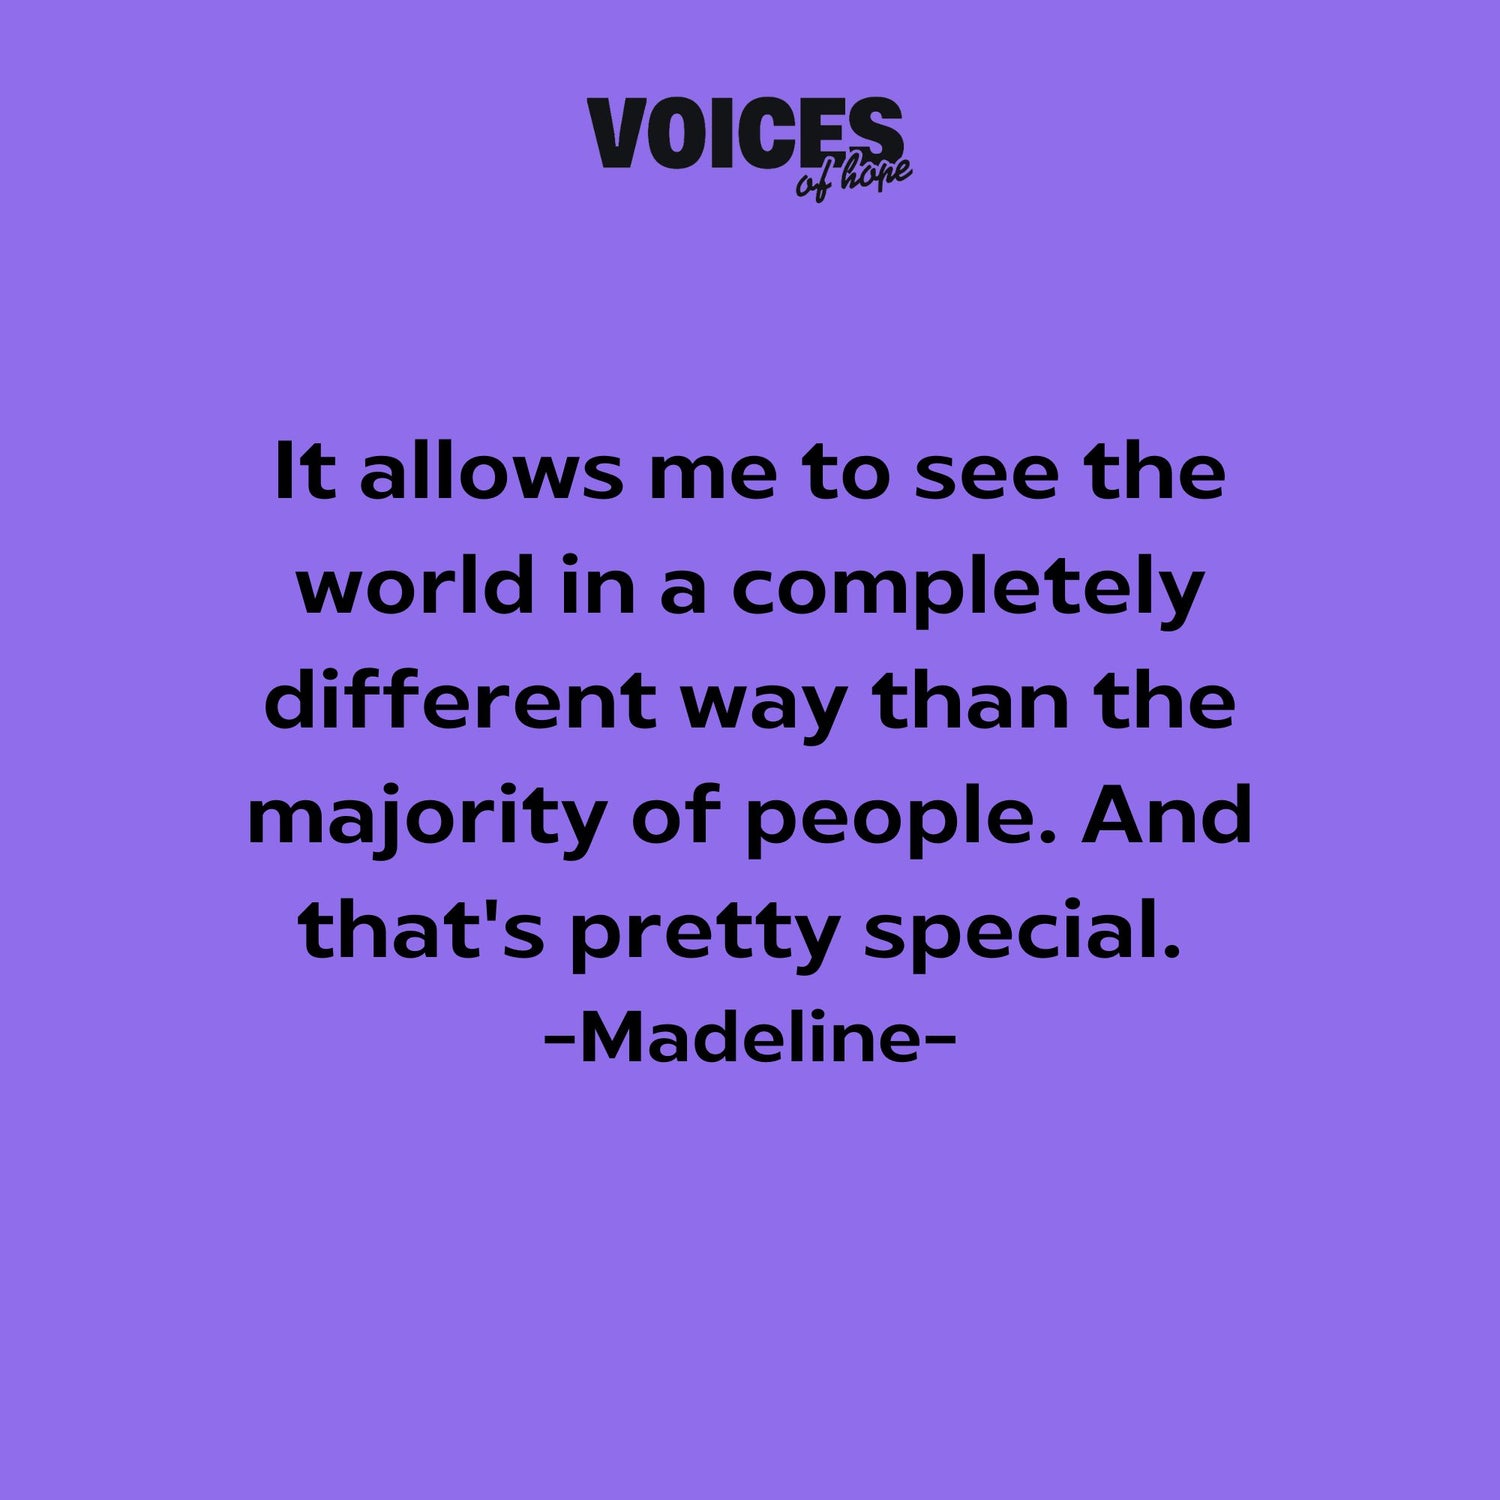 Purple background with black writing that reads: "it allows me to see the world in a completely different way than the majority of people. And that's pretty special. Madeline."